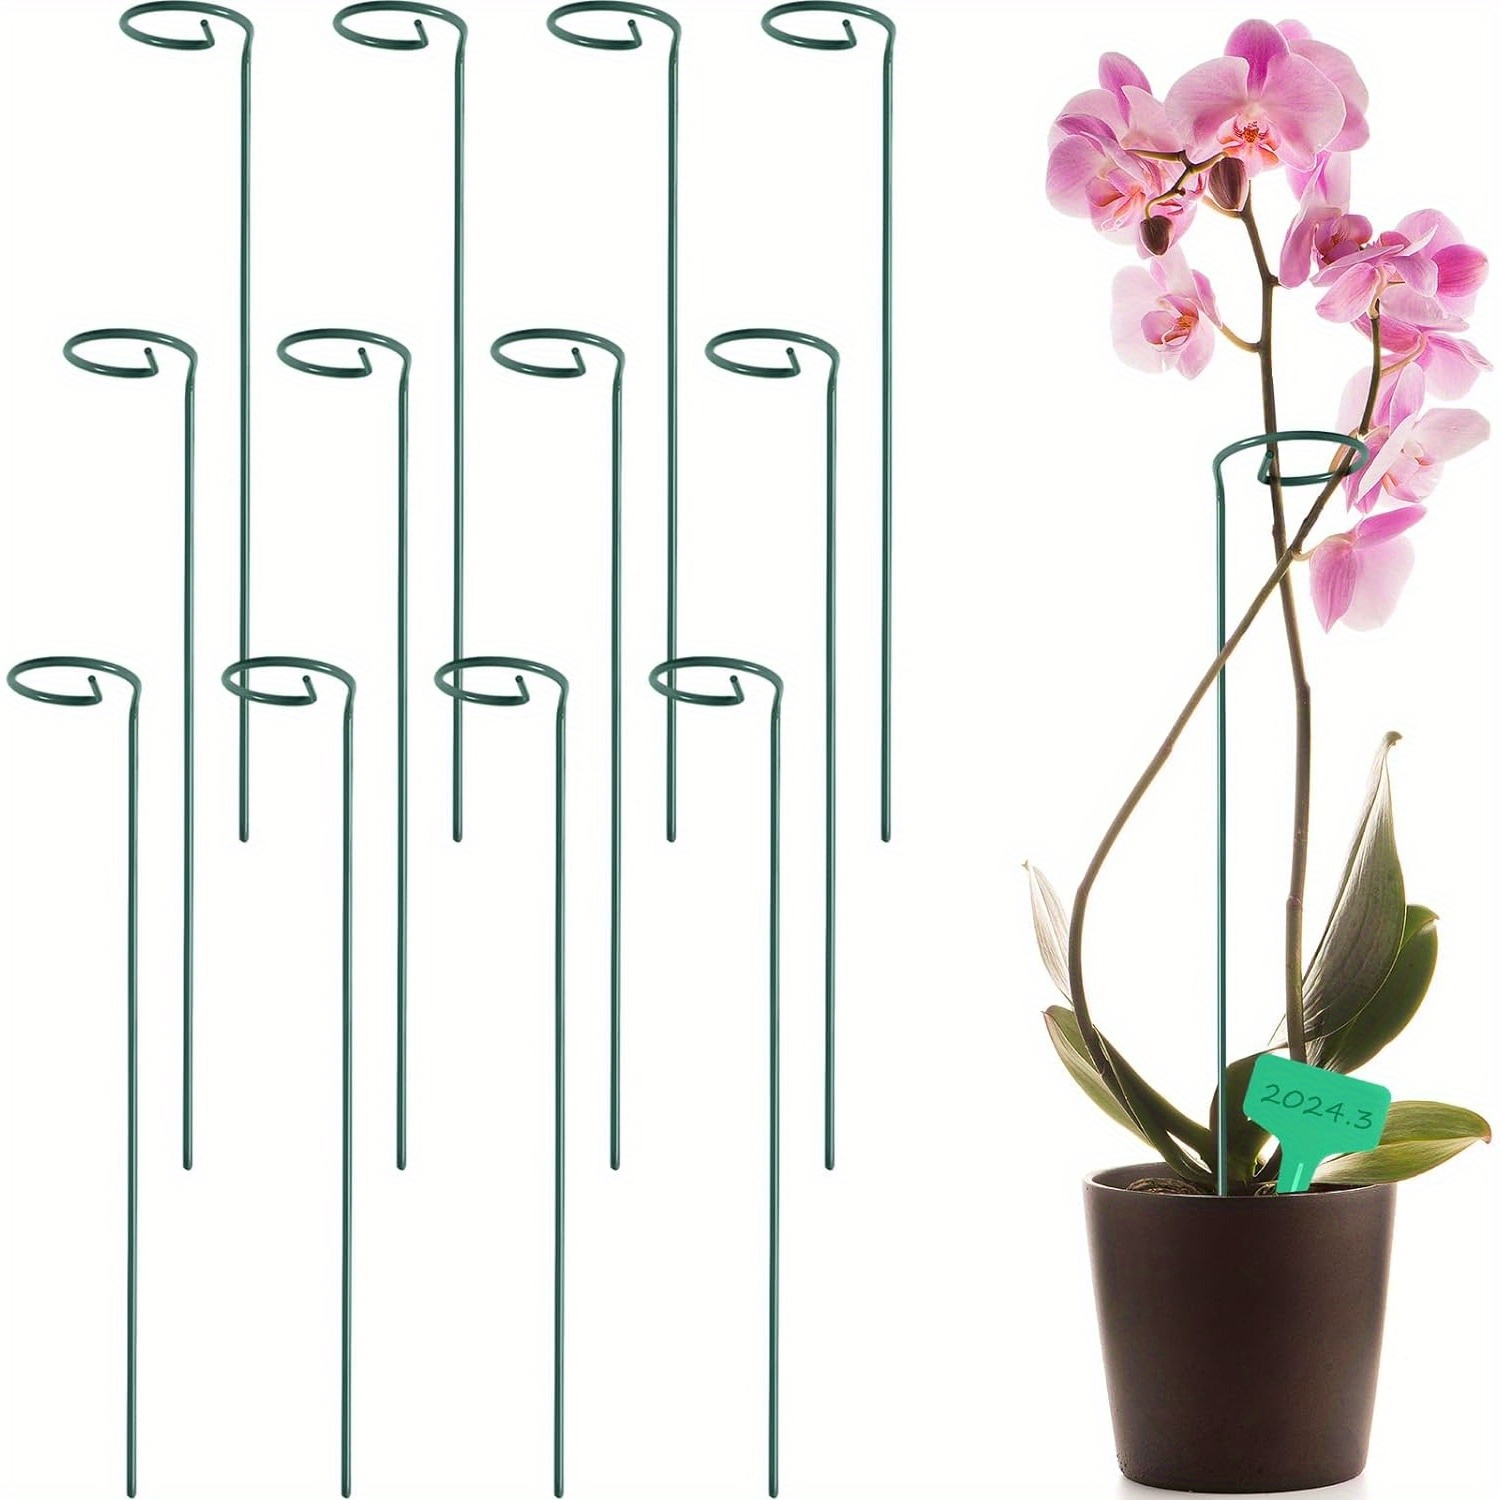 

16 Inches Garden Flower Support Plant Support Stakes, With 15 Pcs Plant Labels, Single Plant Stem Flower Support For Flowers, Orchid, Peony, Lily, Rose